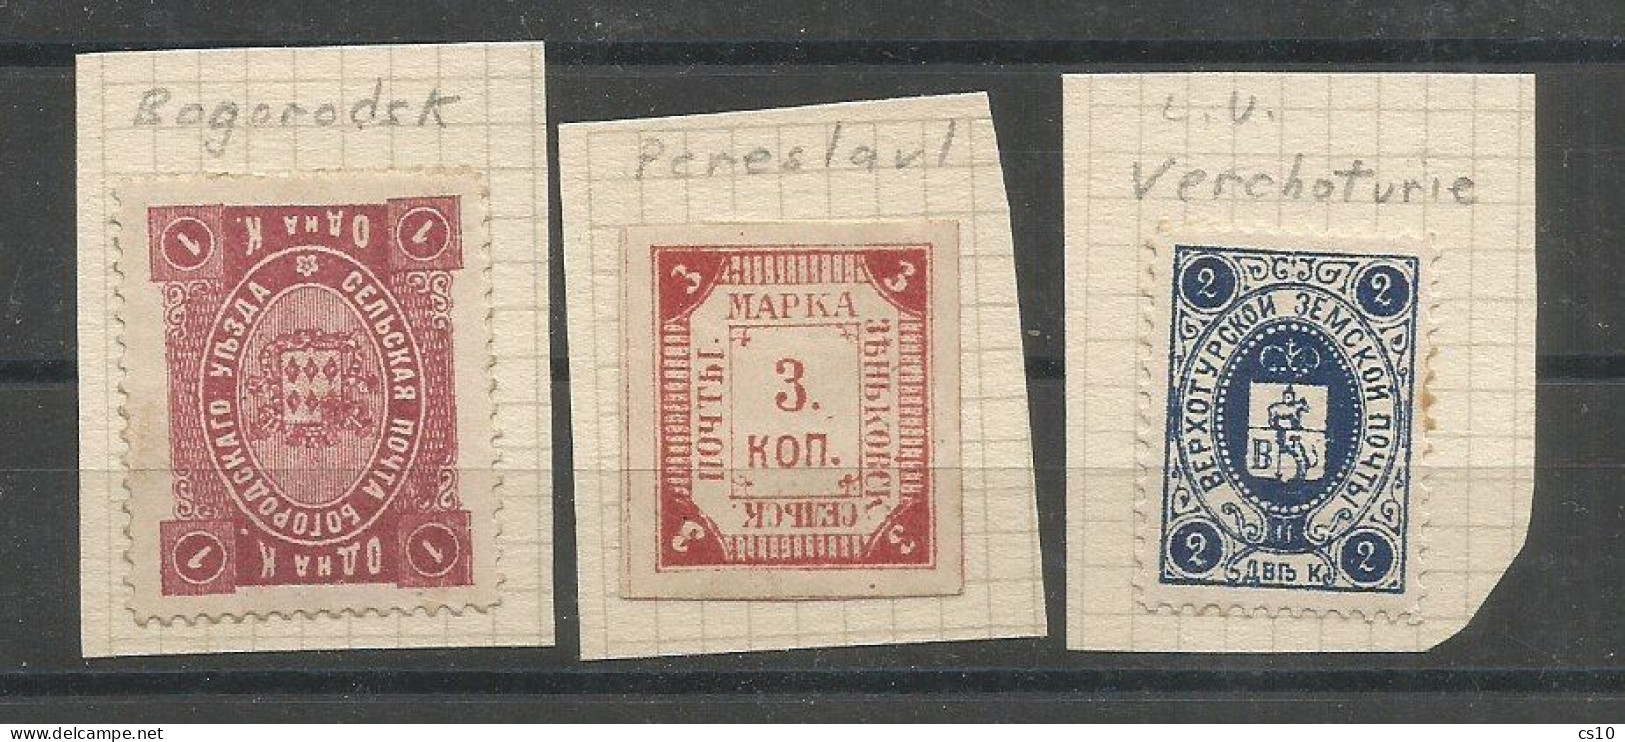 Old Russia Empire & Area #13 Scans Study Lot Of 490 Pcs Mint/Used Including Suomi Finland Levant, Some Piece, Imperf - Collections